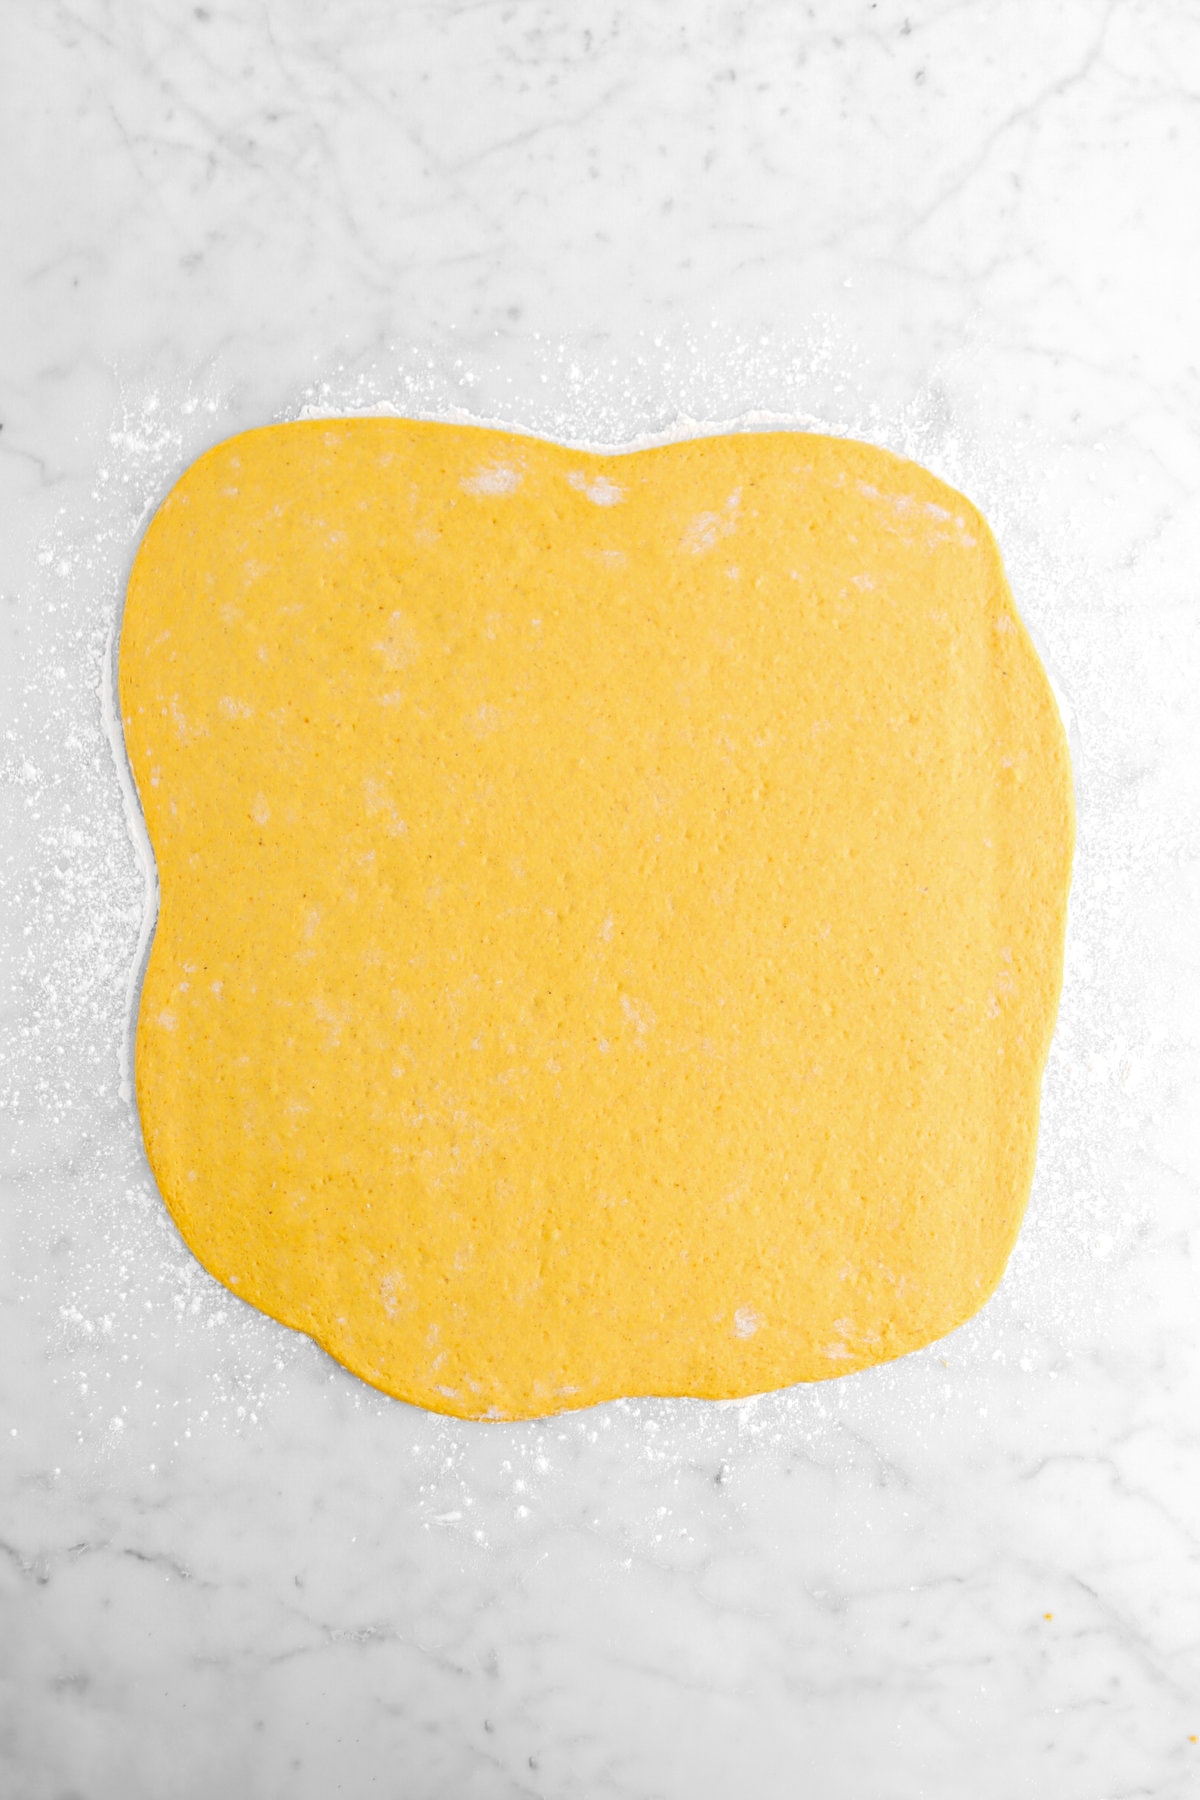 pumpkin dough rolled out into a square on marble surface.